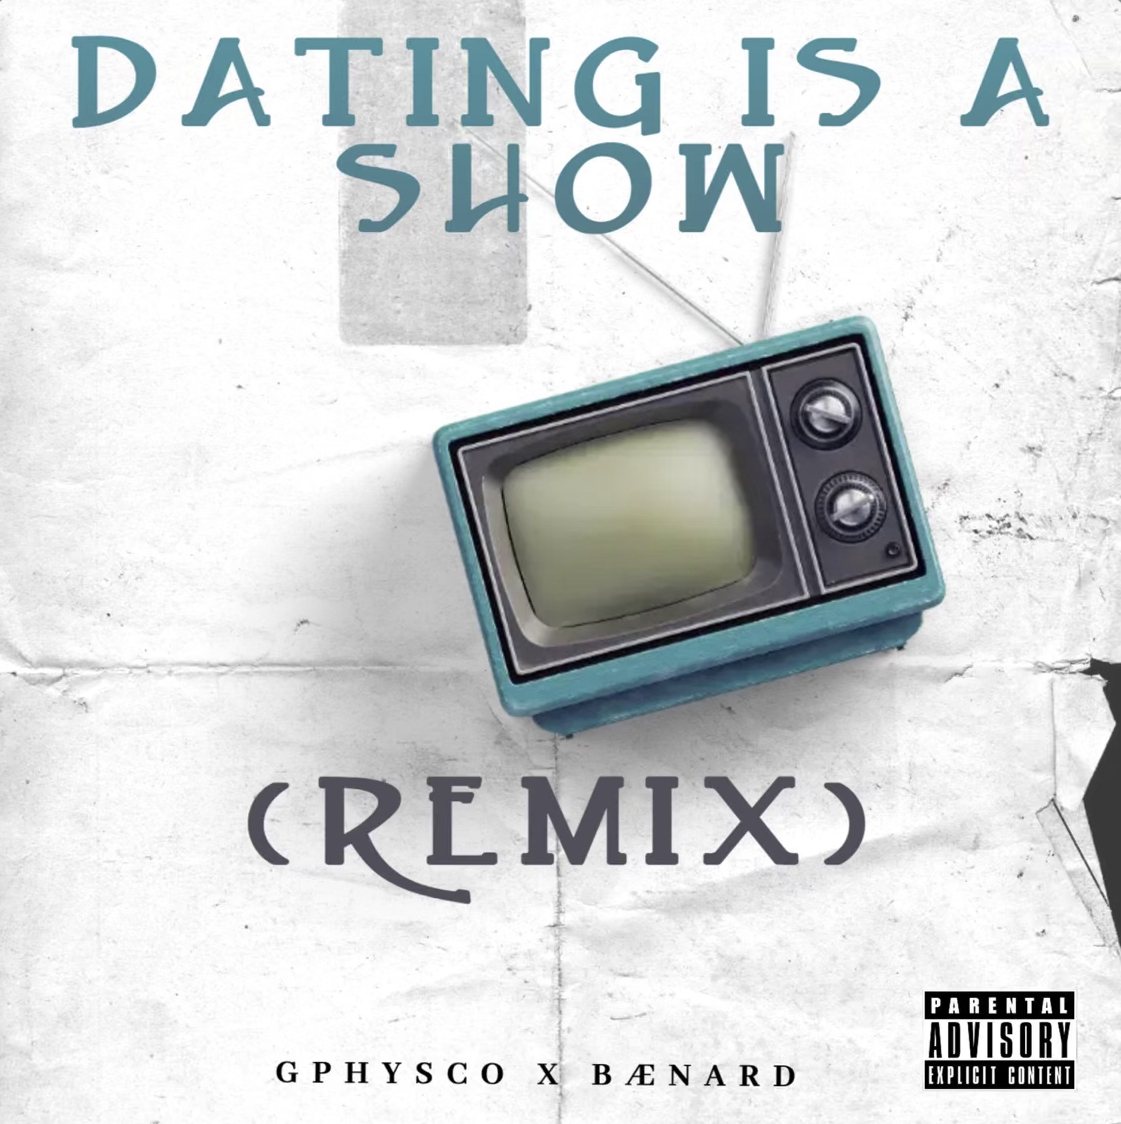 DATING IS A SHOW (REMIX) GETS DROPPED BY GPHYSCO & BÆNARD